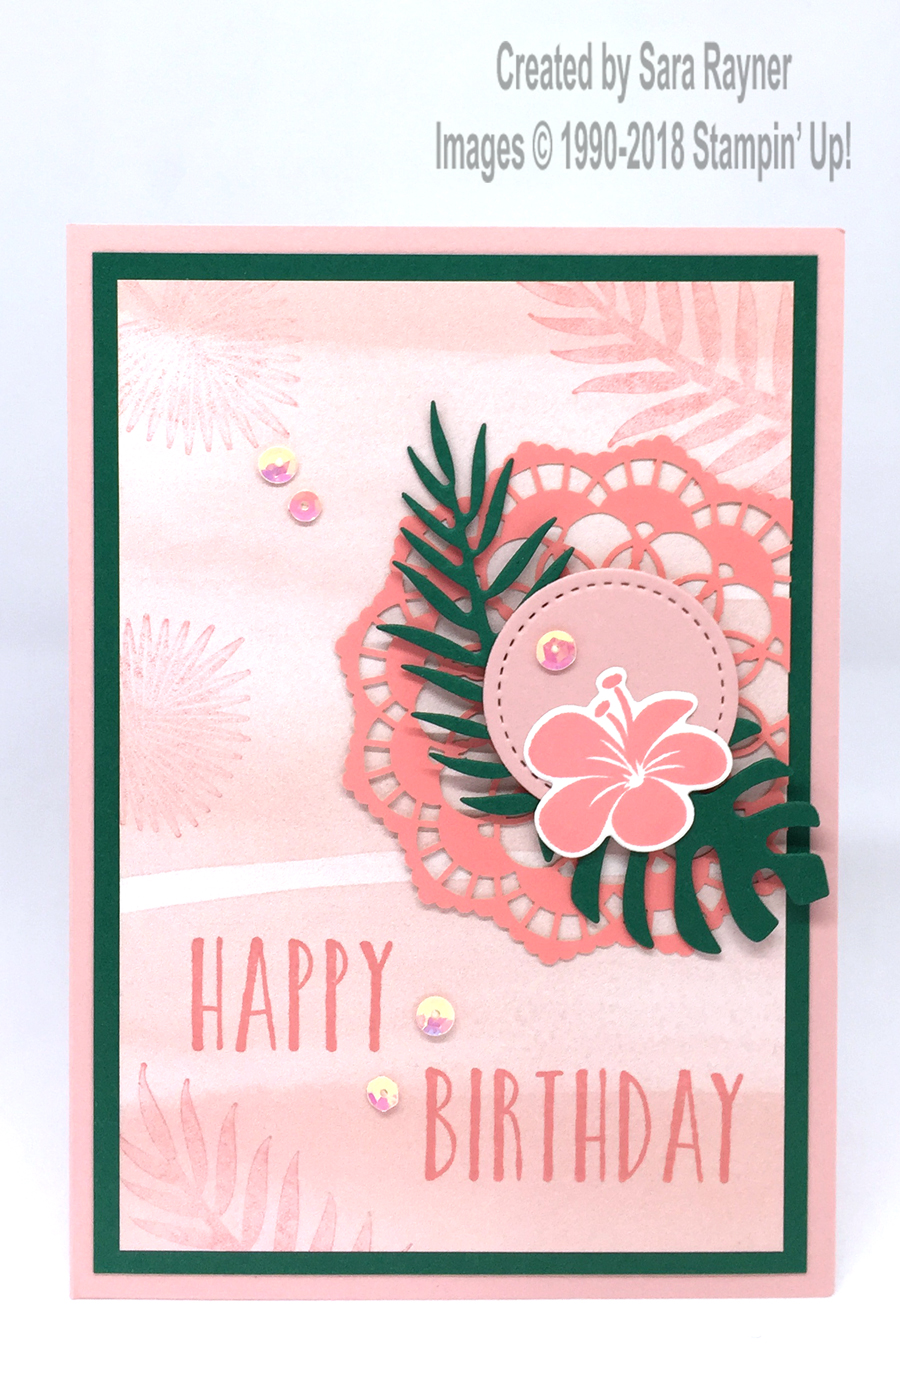 Tropical chic pink birthday card - Sara's crafting and stamping studio